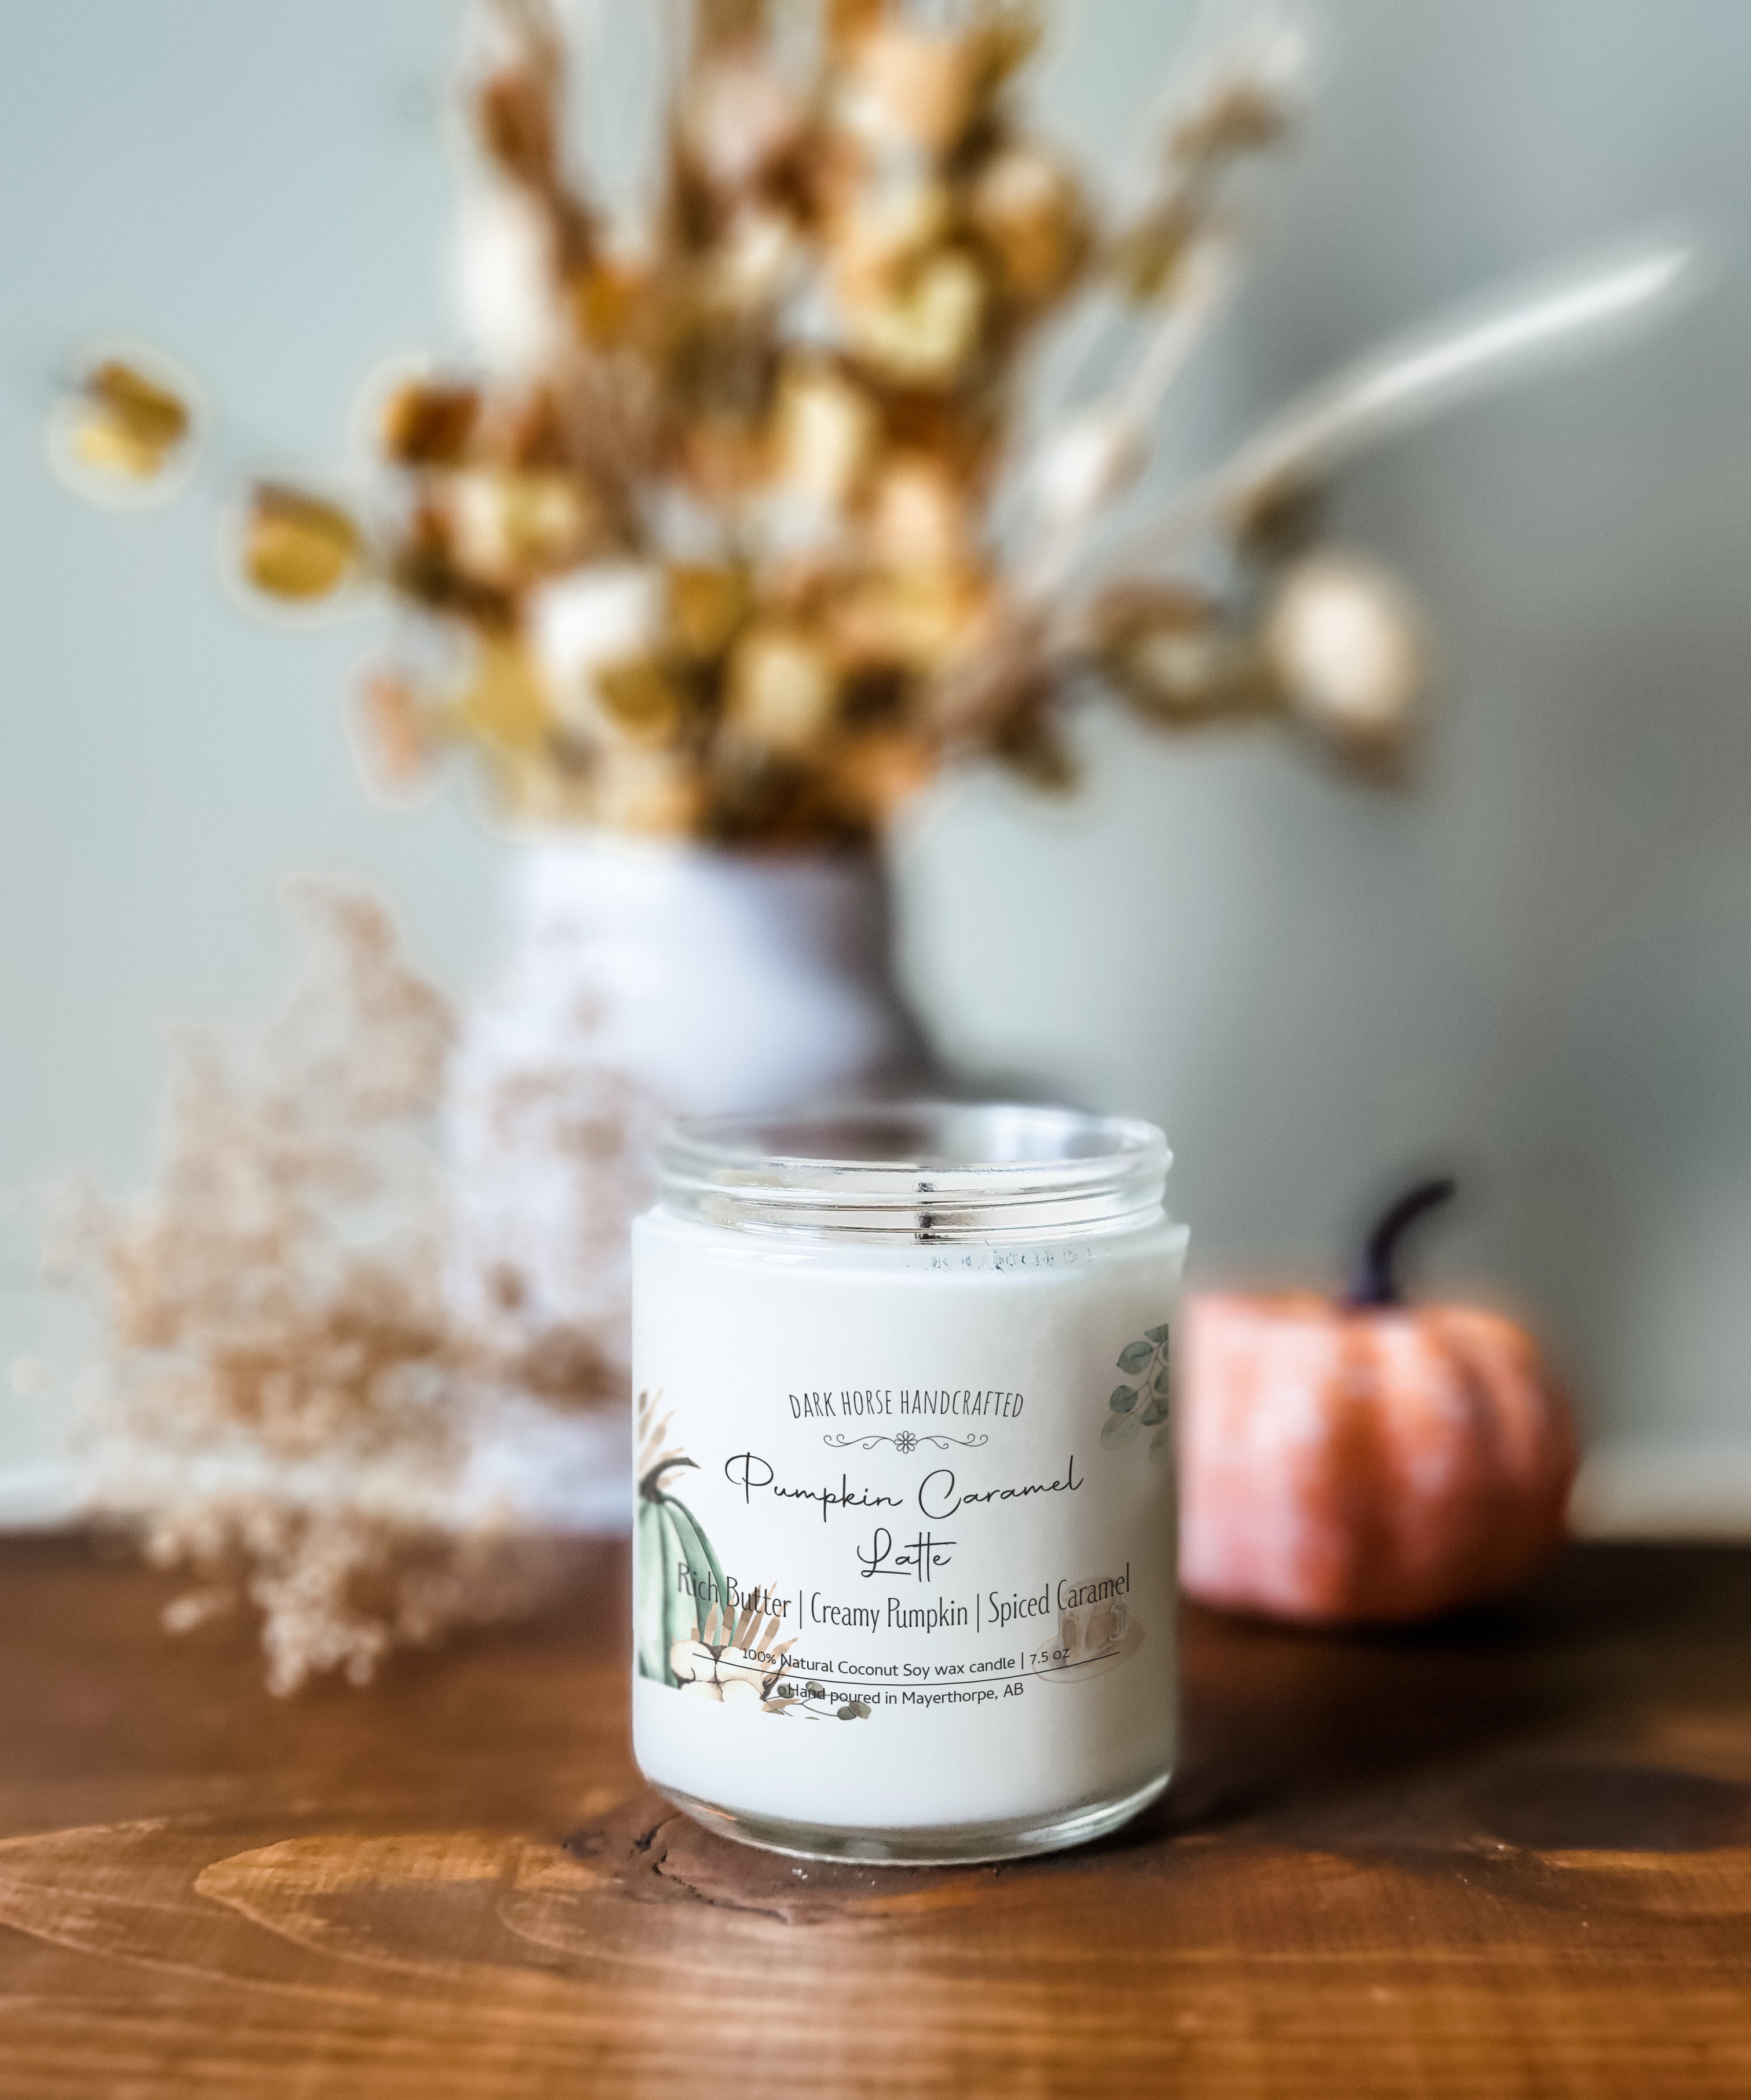 Pumpkin Caramel Latte - Scented Soy Candle